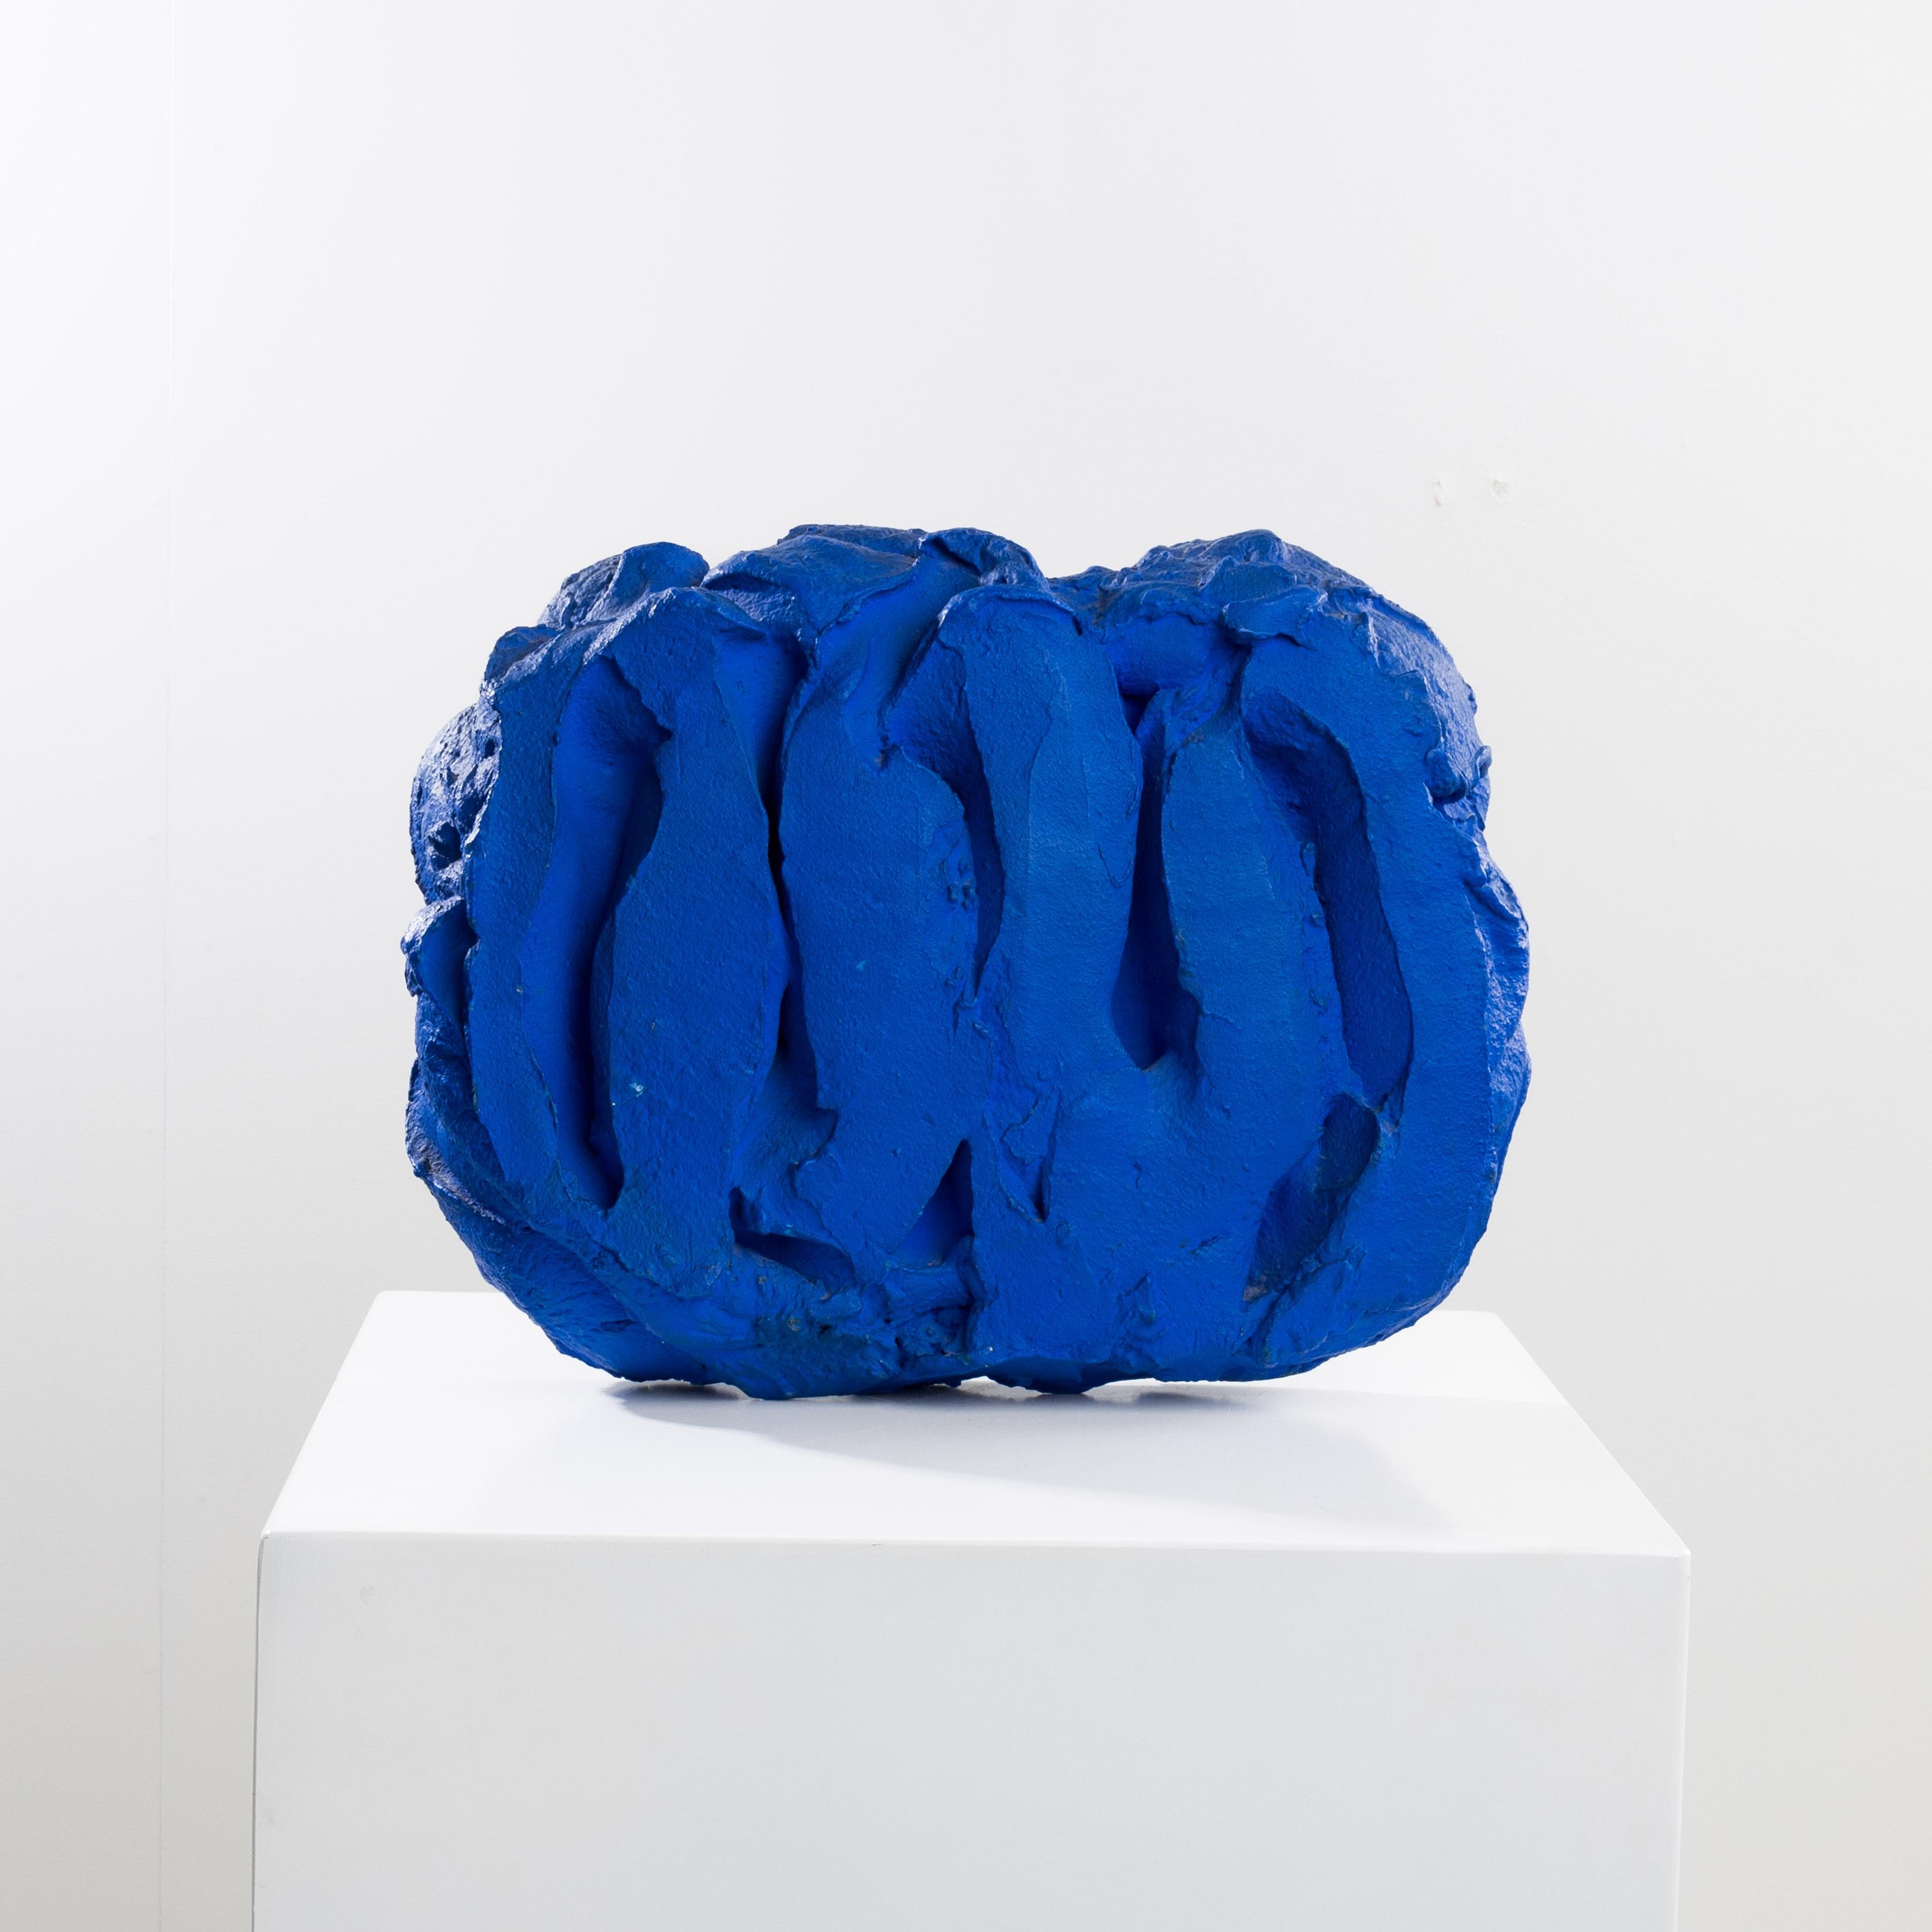 Blauw (Blue) by Bram Bogart.
Material sculpture (mixed media) in blue “Klein” pigmented mortar on a wooden structure.
Signed and titled on the reverse
“Bram Bogart”
“Maart 1973”
“Blauw”
Signed on the right side of the work “Bogart ’73”